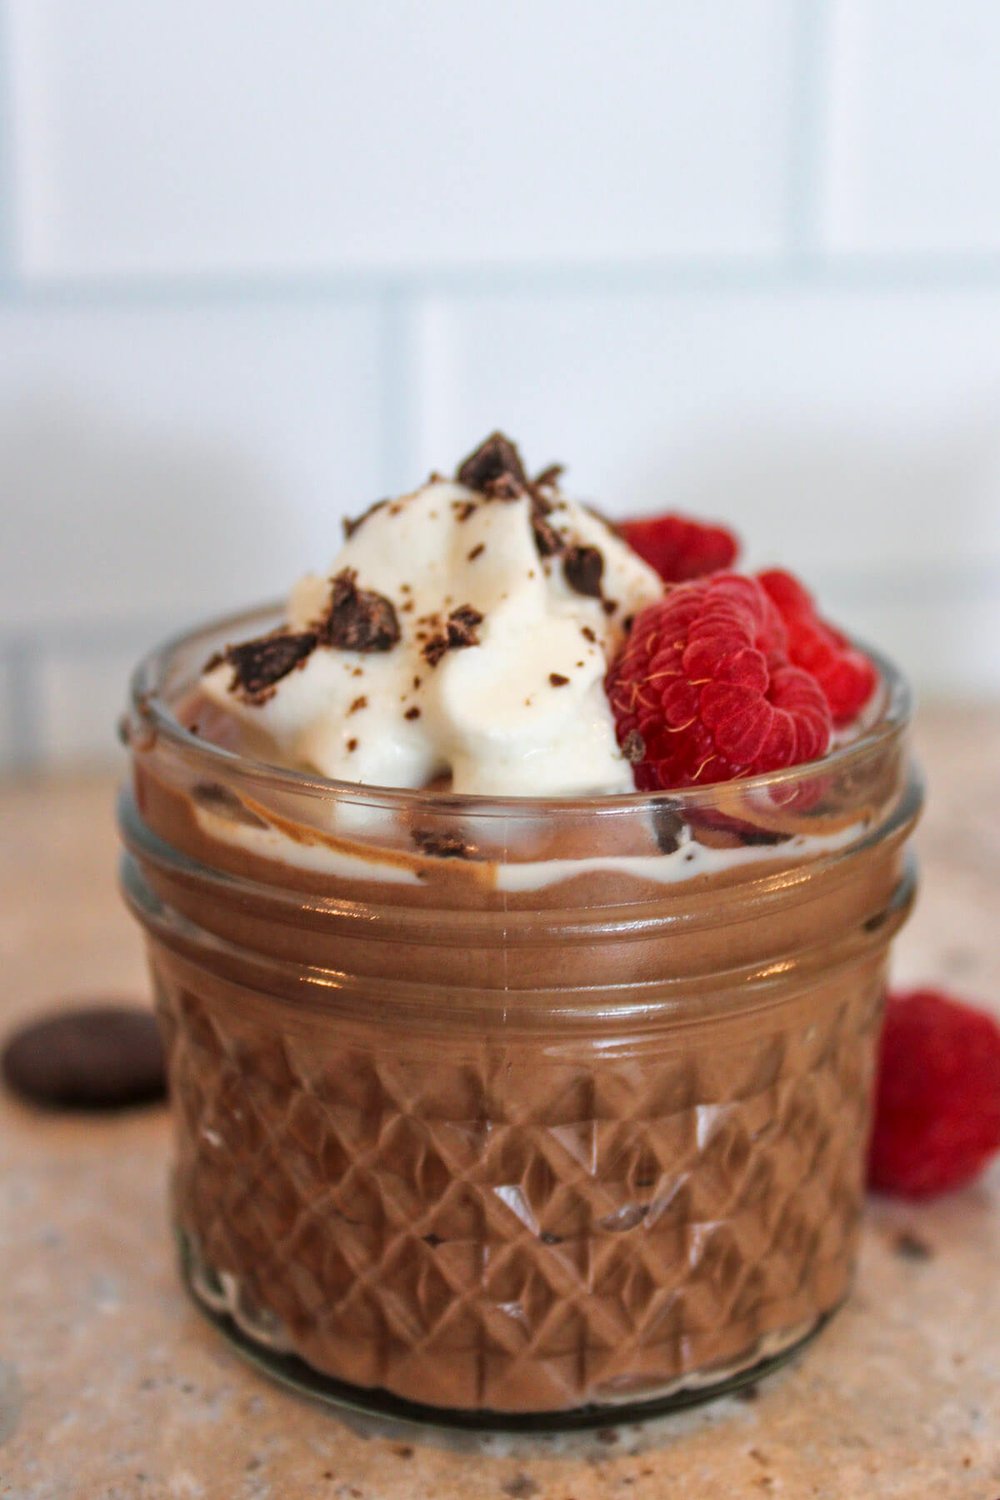 High Protein Chocolate Mousse with Cottage Cheese